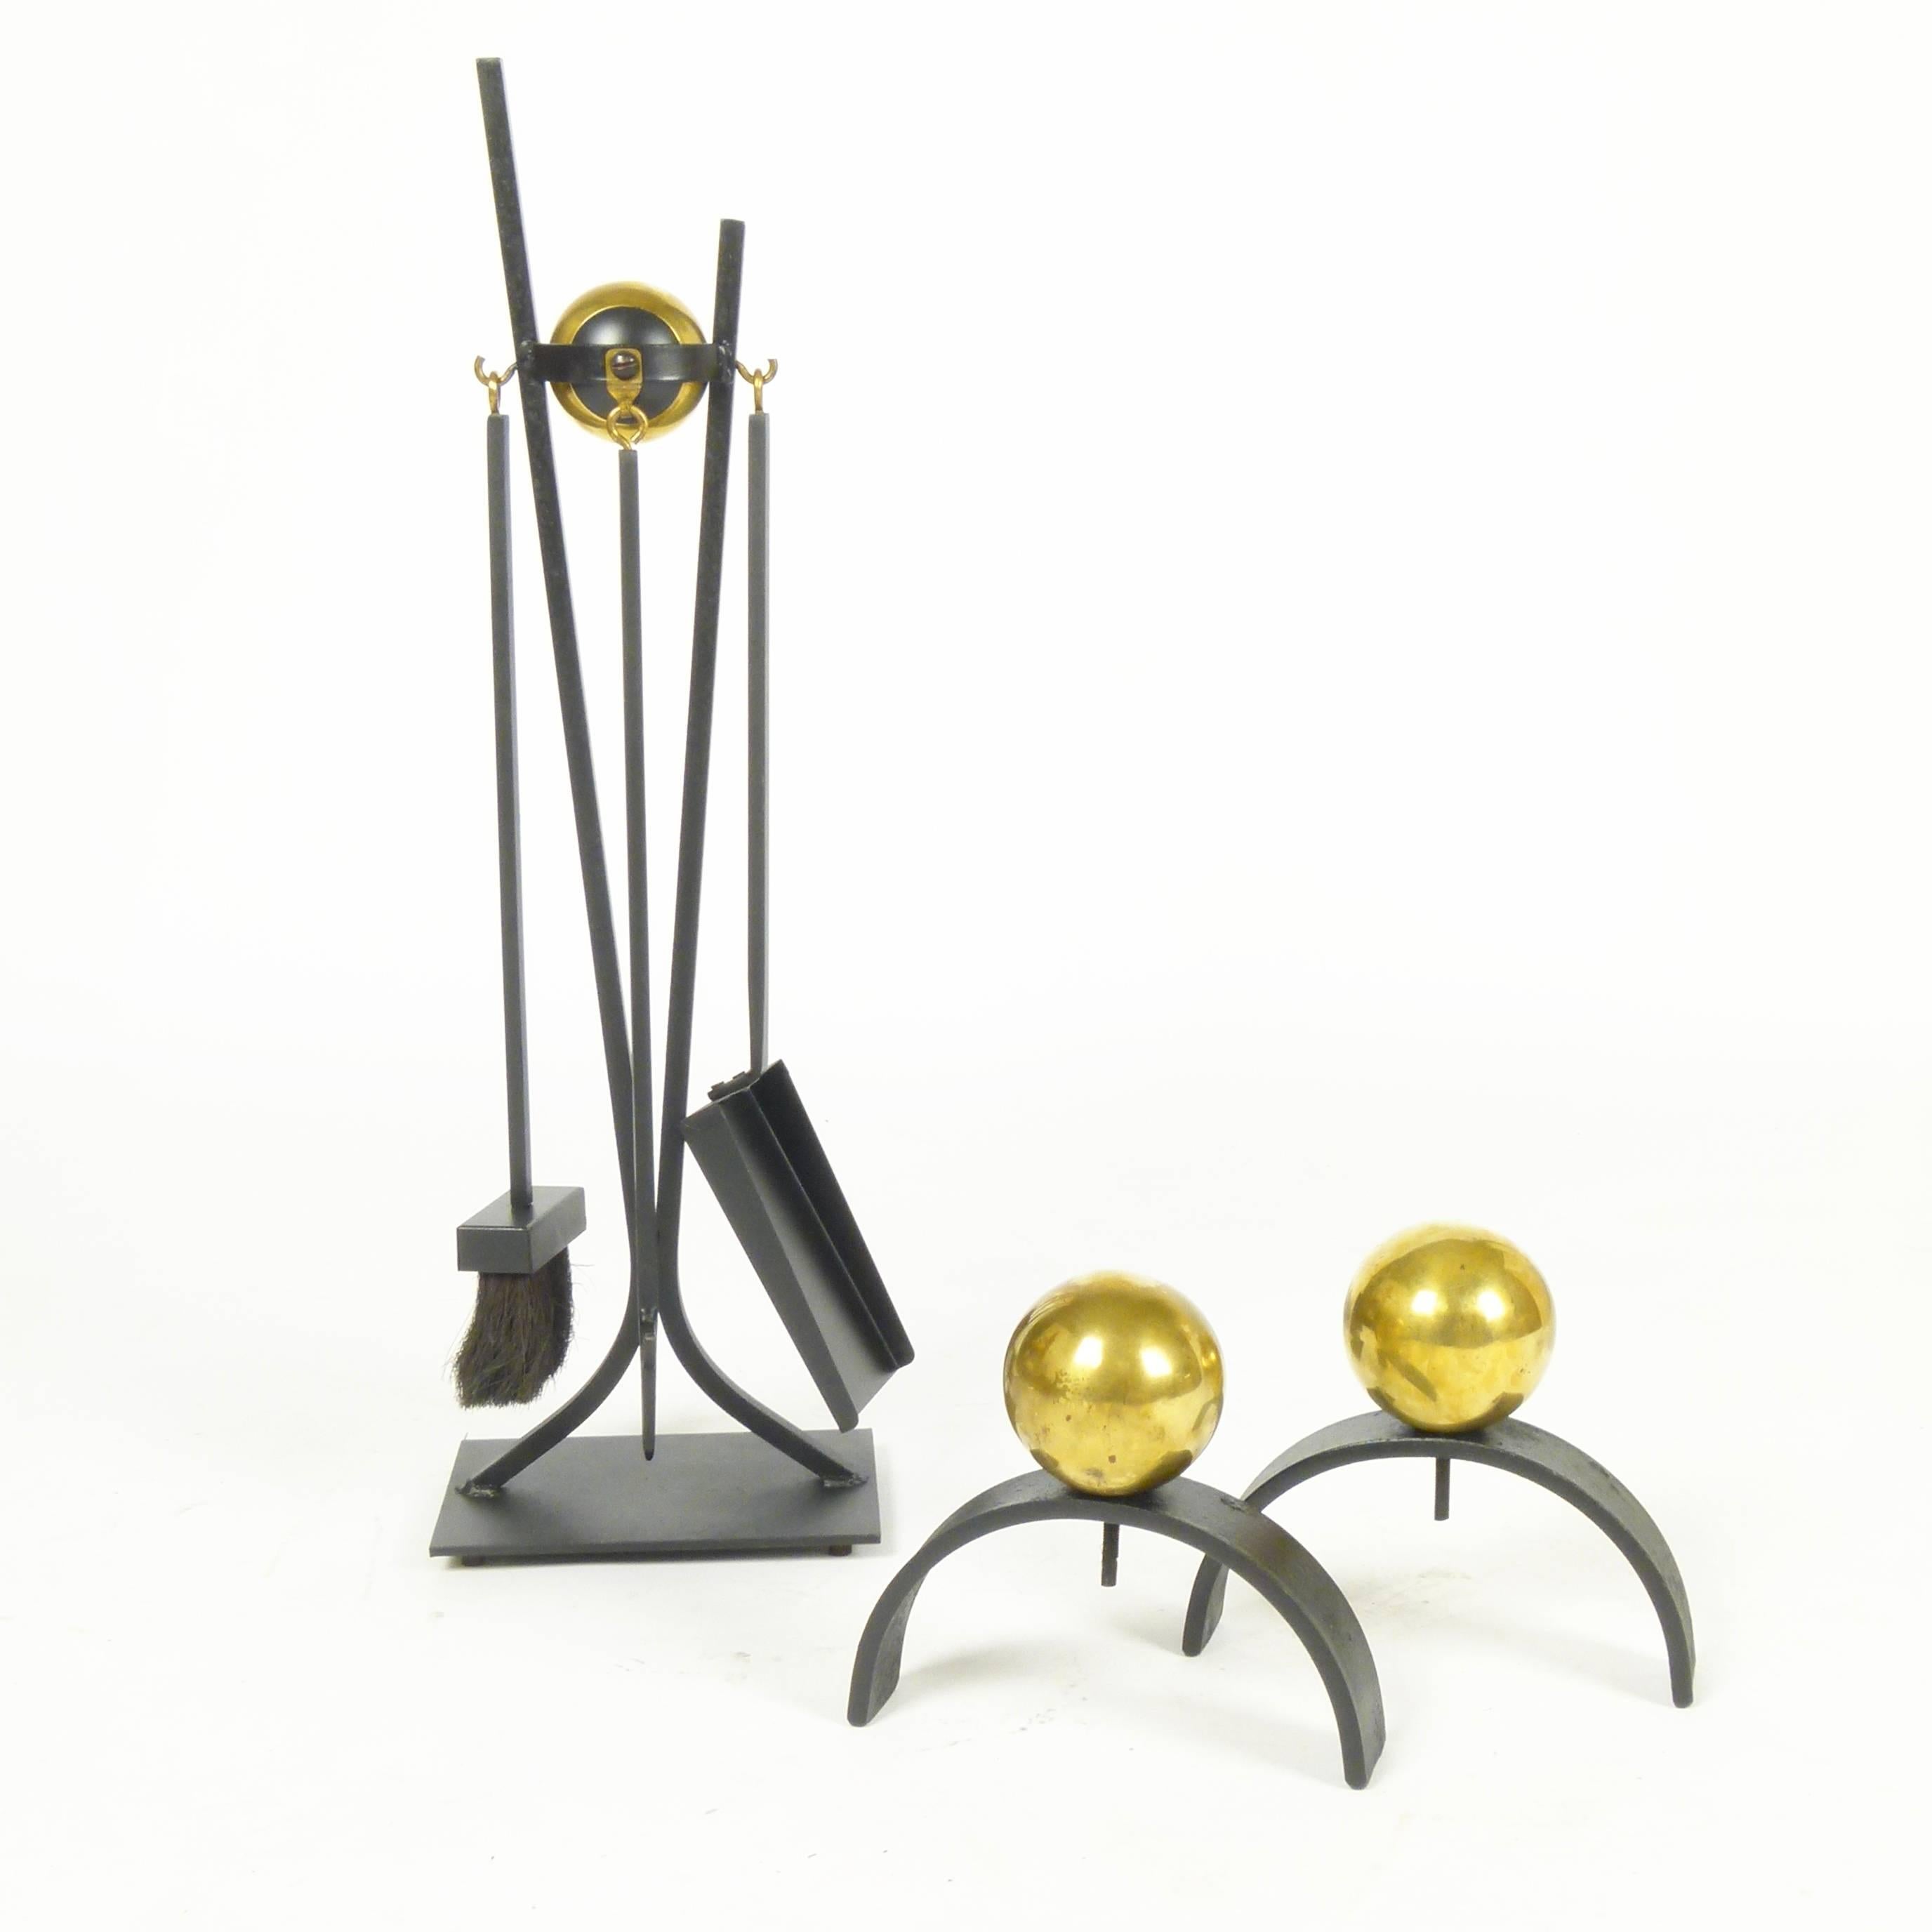 Brass and iron fireplace tools and andiron set often attributed to Donald Deskey.
Measurements: Tools measure 30.5